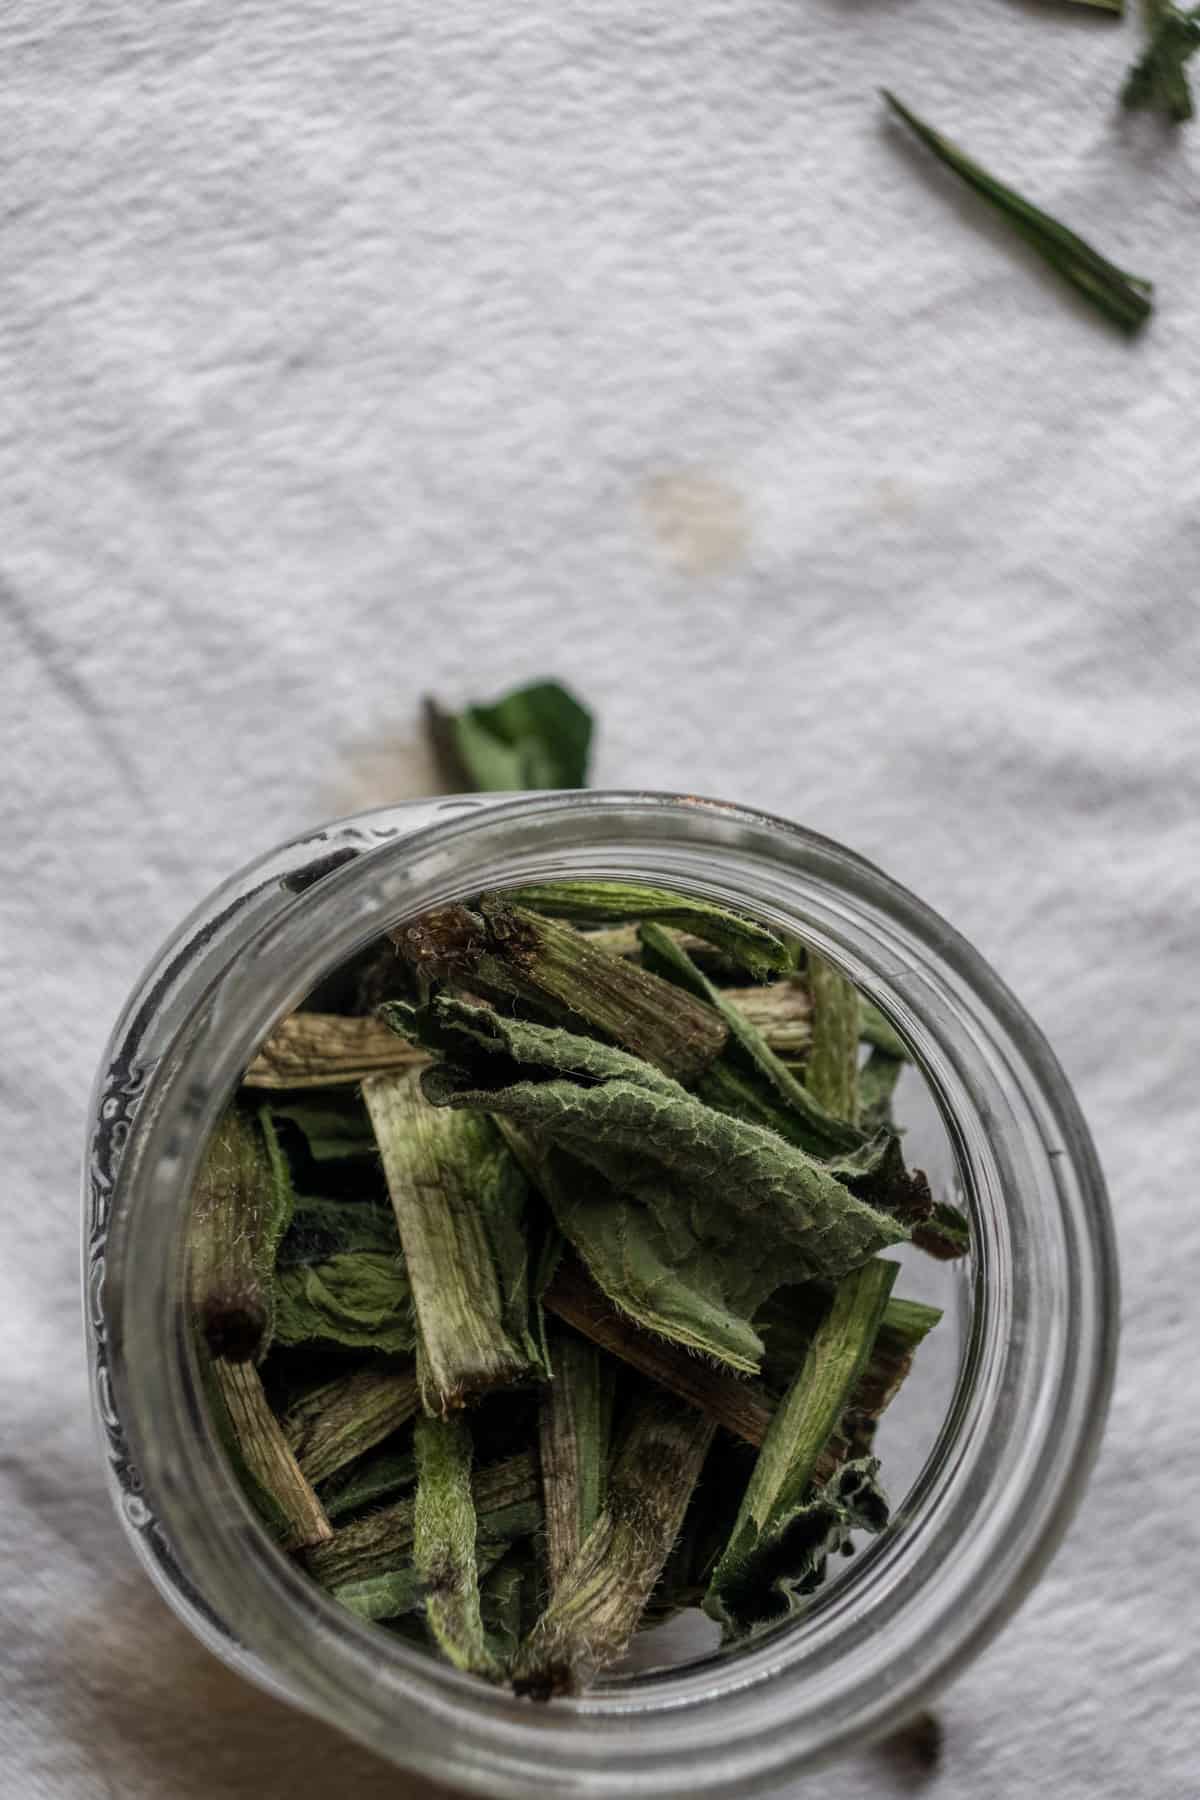 Dried comfrey leaves in a jar